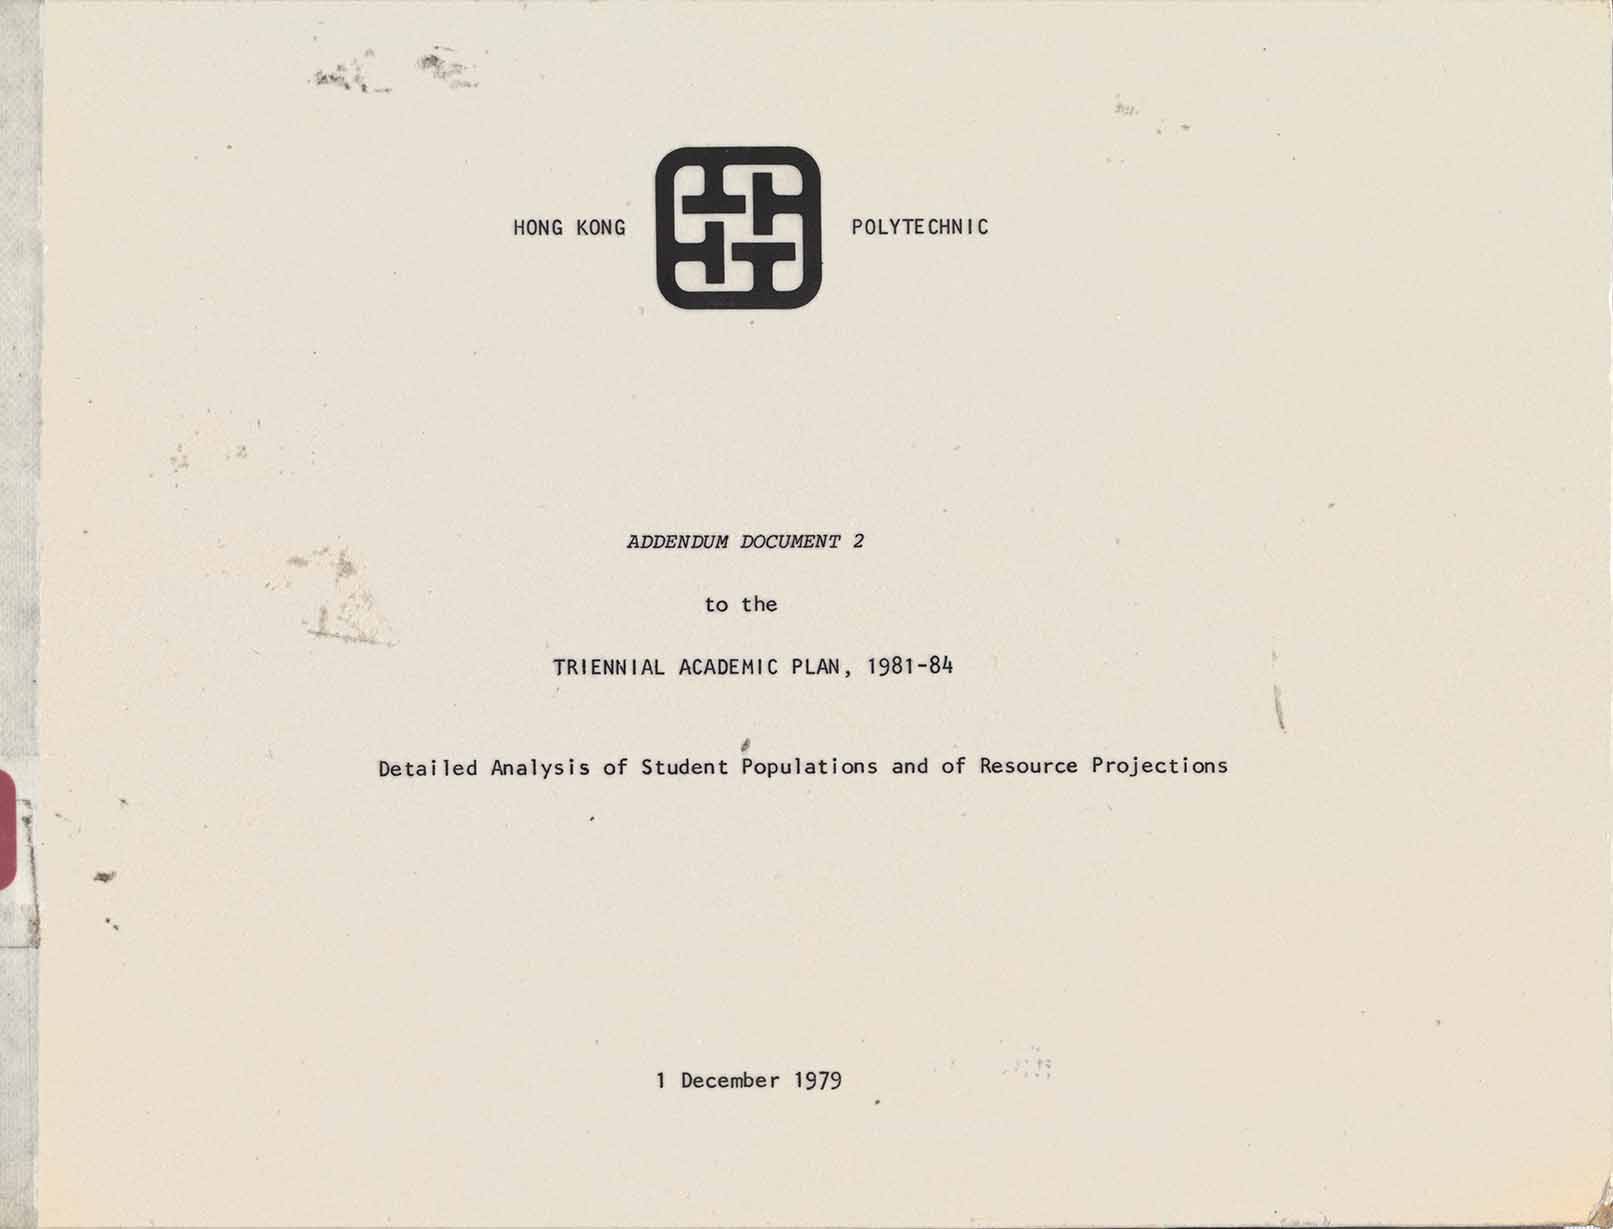 Addendum document 2 to the Triennial Academic plan, 1981-84 - detailed analysis of student populations and of resource projections